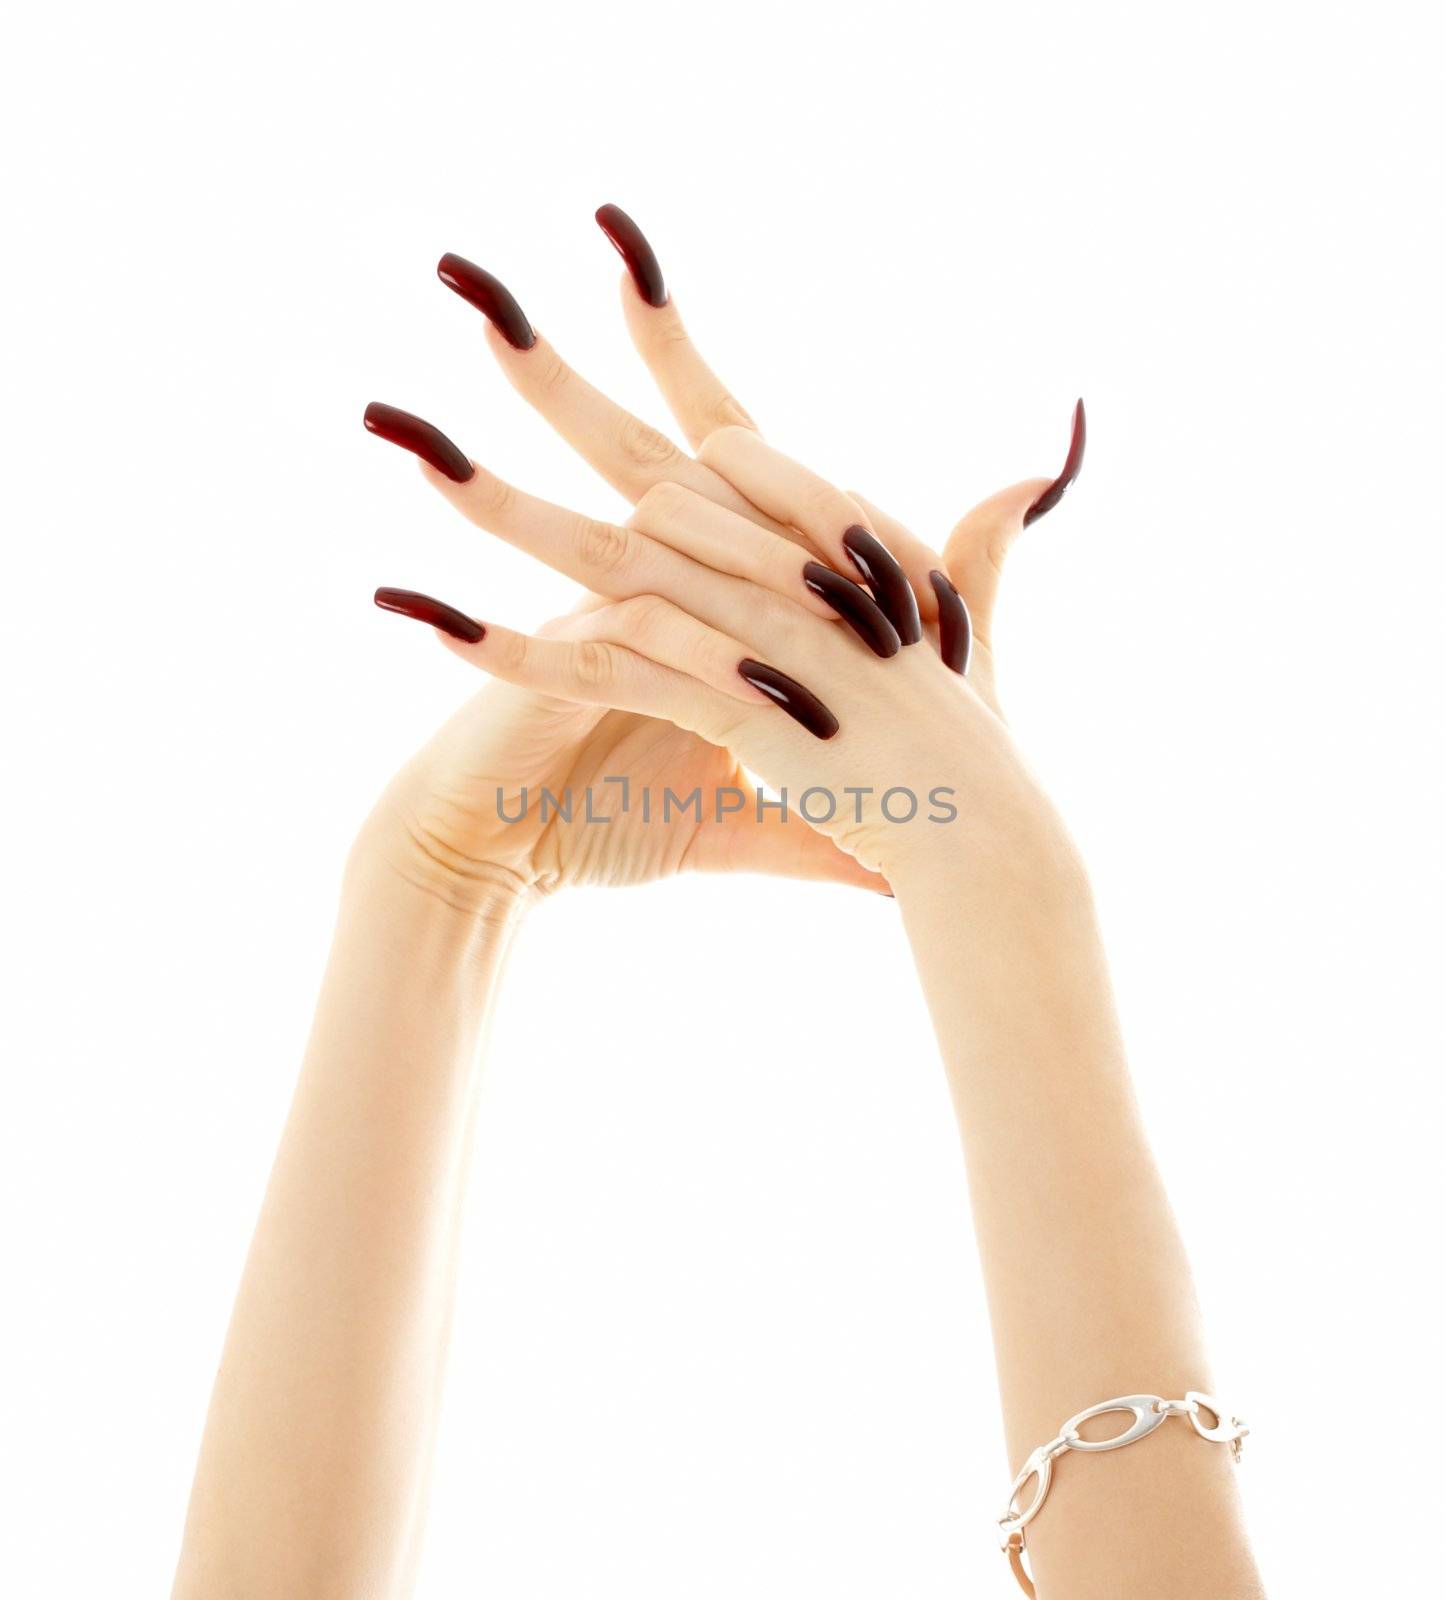 hands with long acrylic nails over white